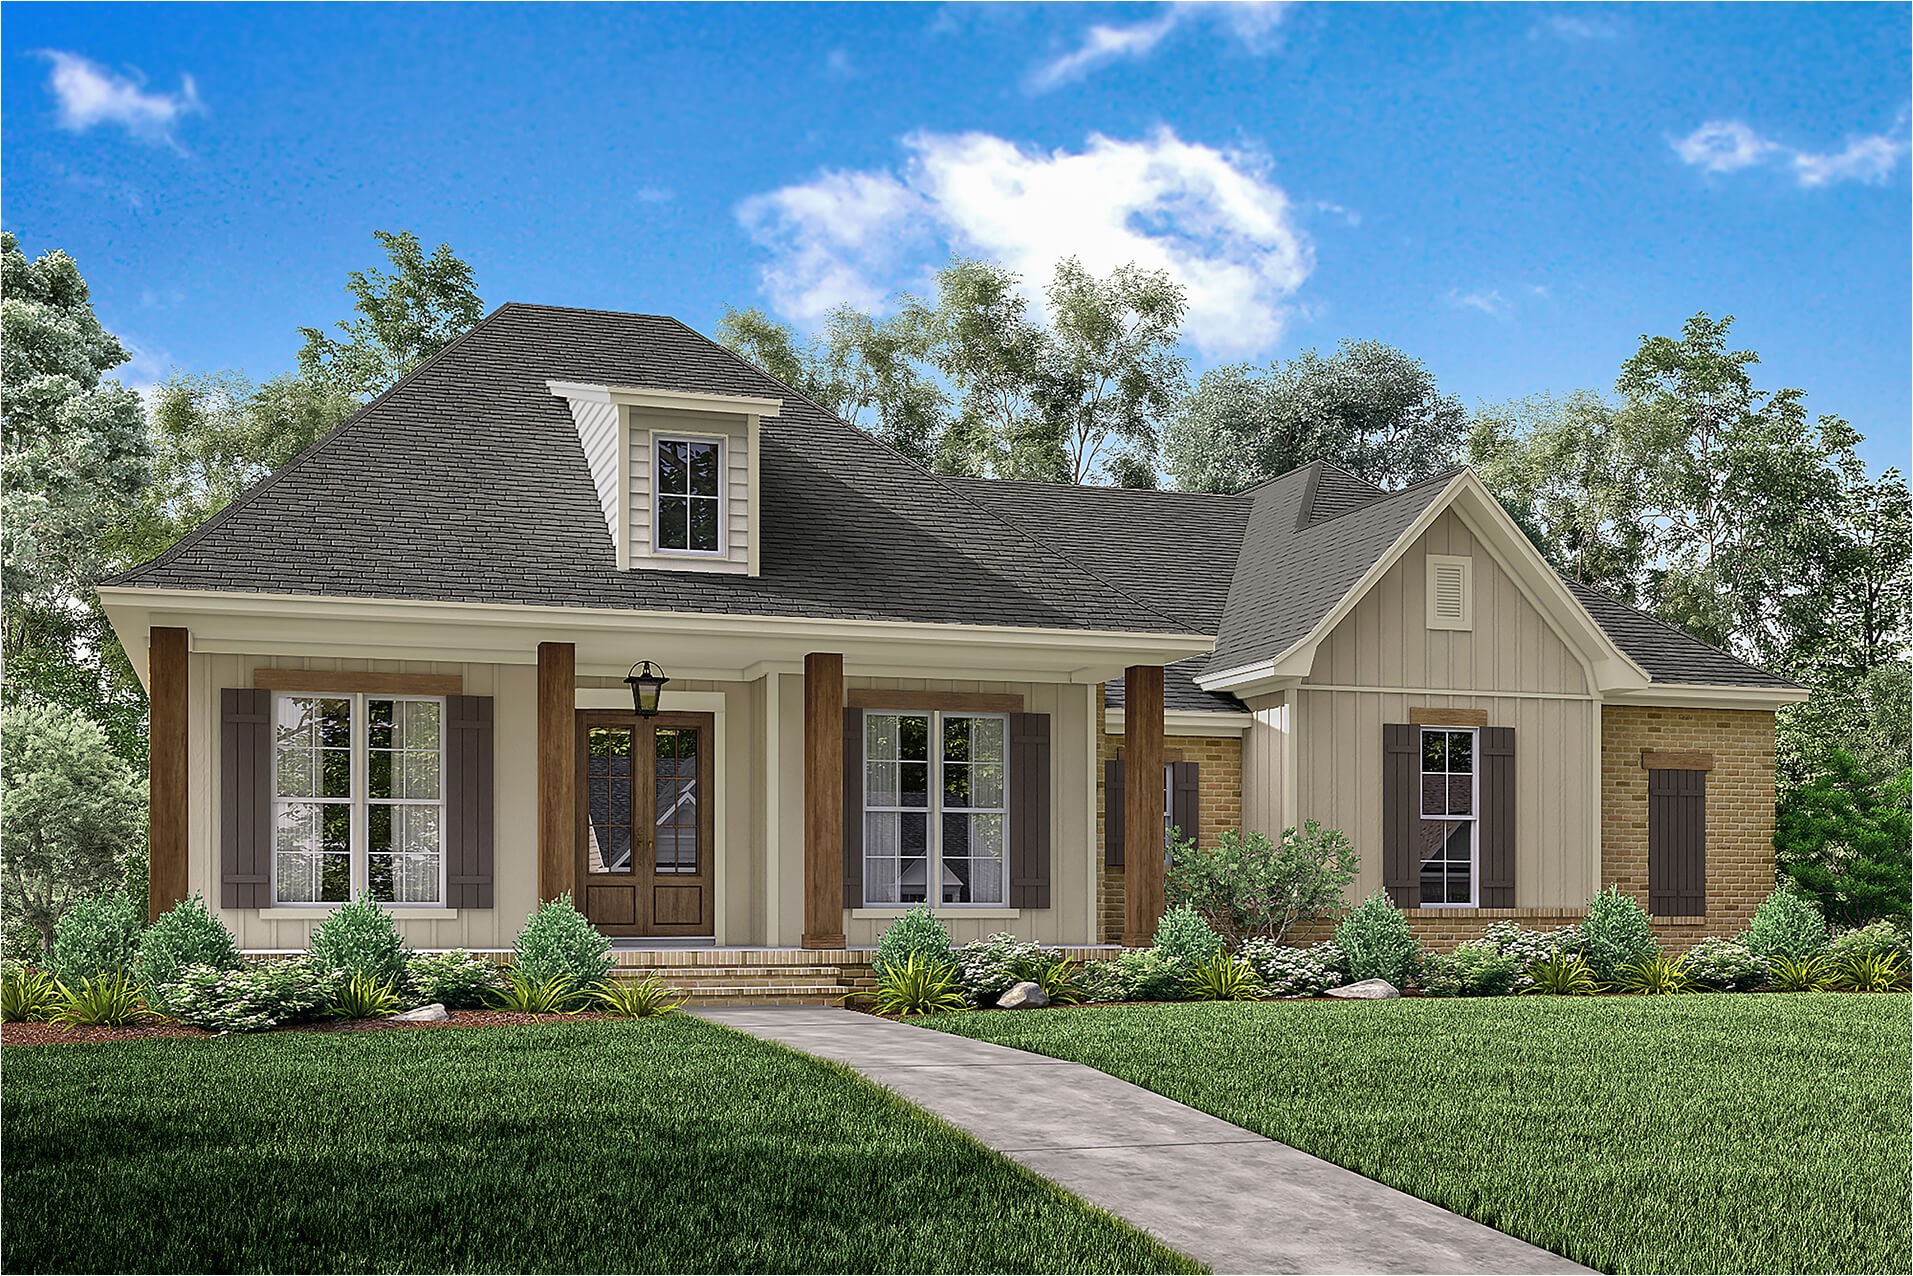 Home Plans with 3 Bedrm 1900 Sq Ft Acadian House Plan 142 1163